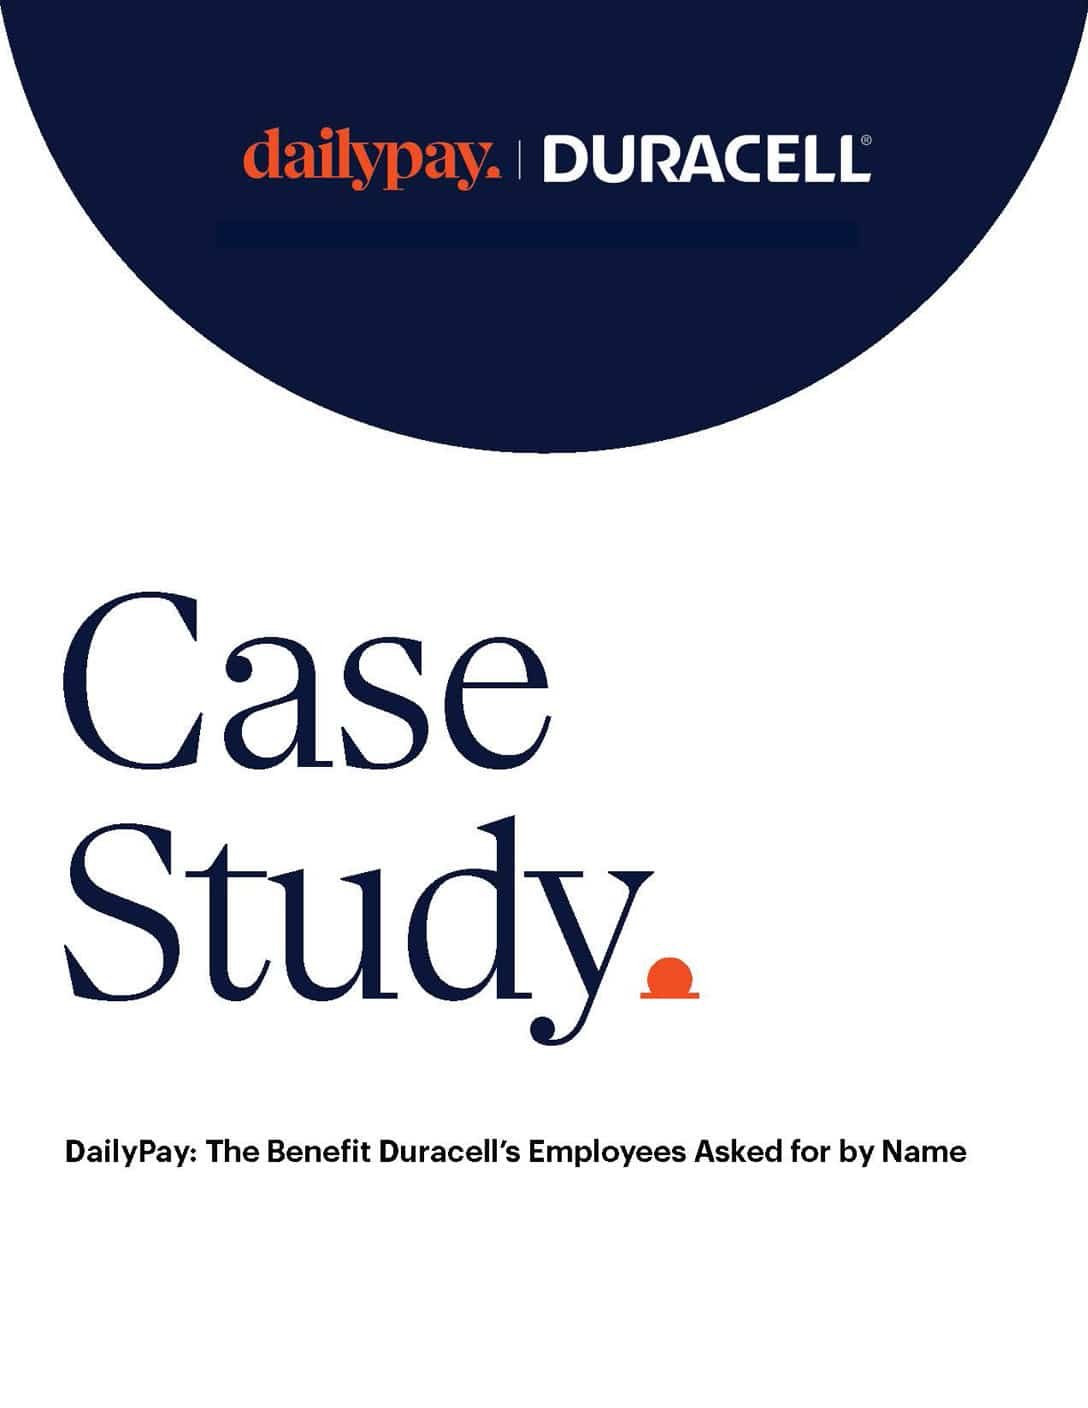 Cover page of a case study titled "DailyPay | Duracell: Case Study" with a subheading, "DailyPay: The Benefit Duracell’s Employees Asked for by Name." The DailyPay and Duracell logos are at the top. The background is white with a simple, professional design.